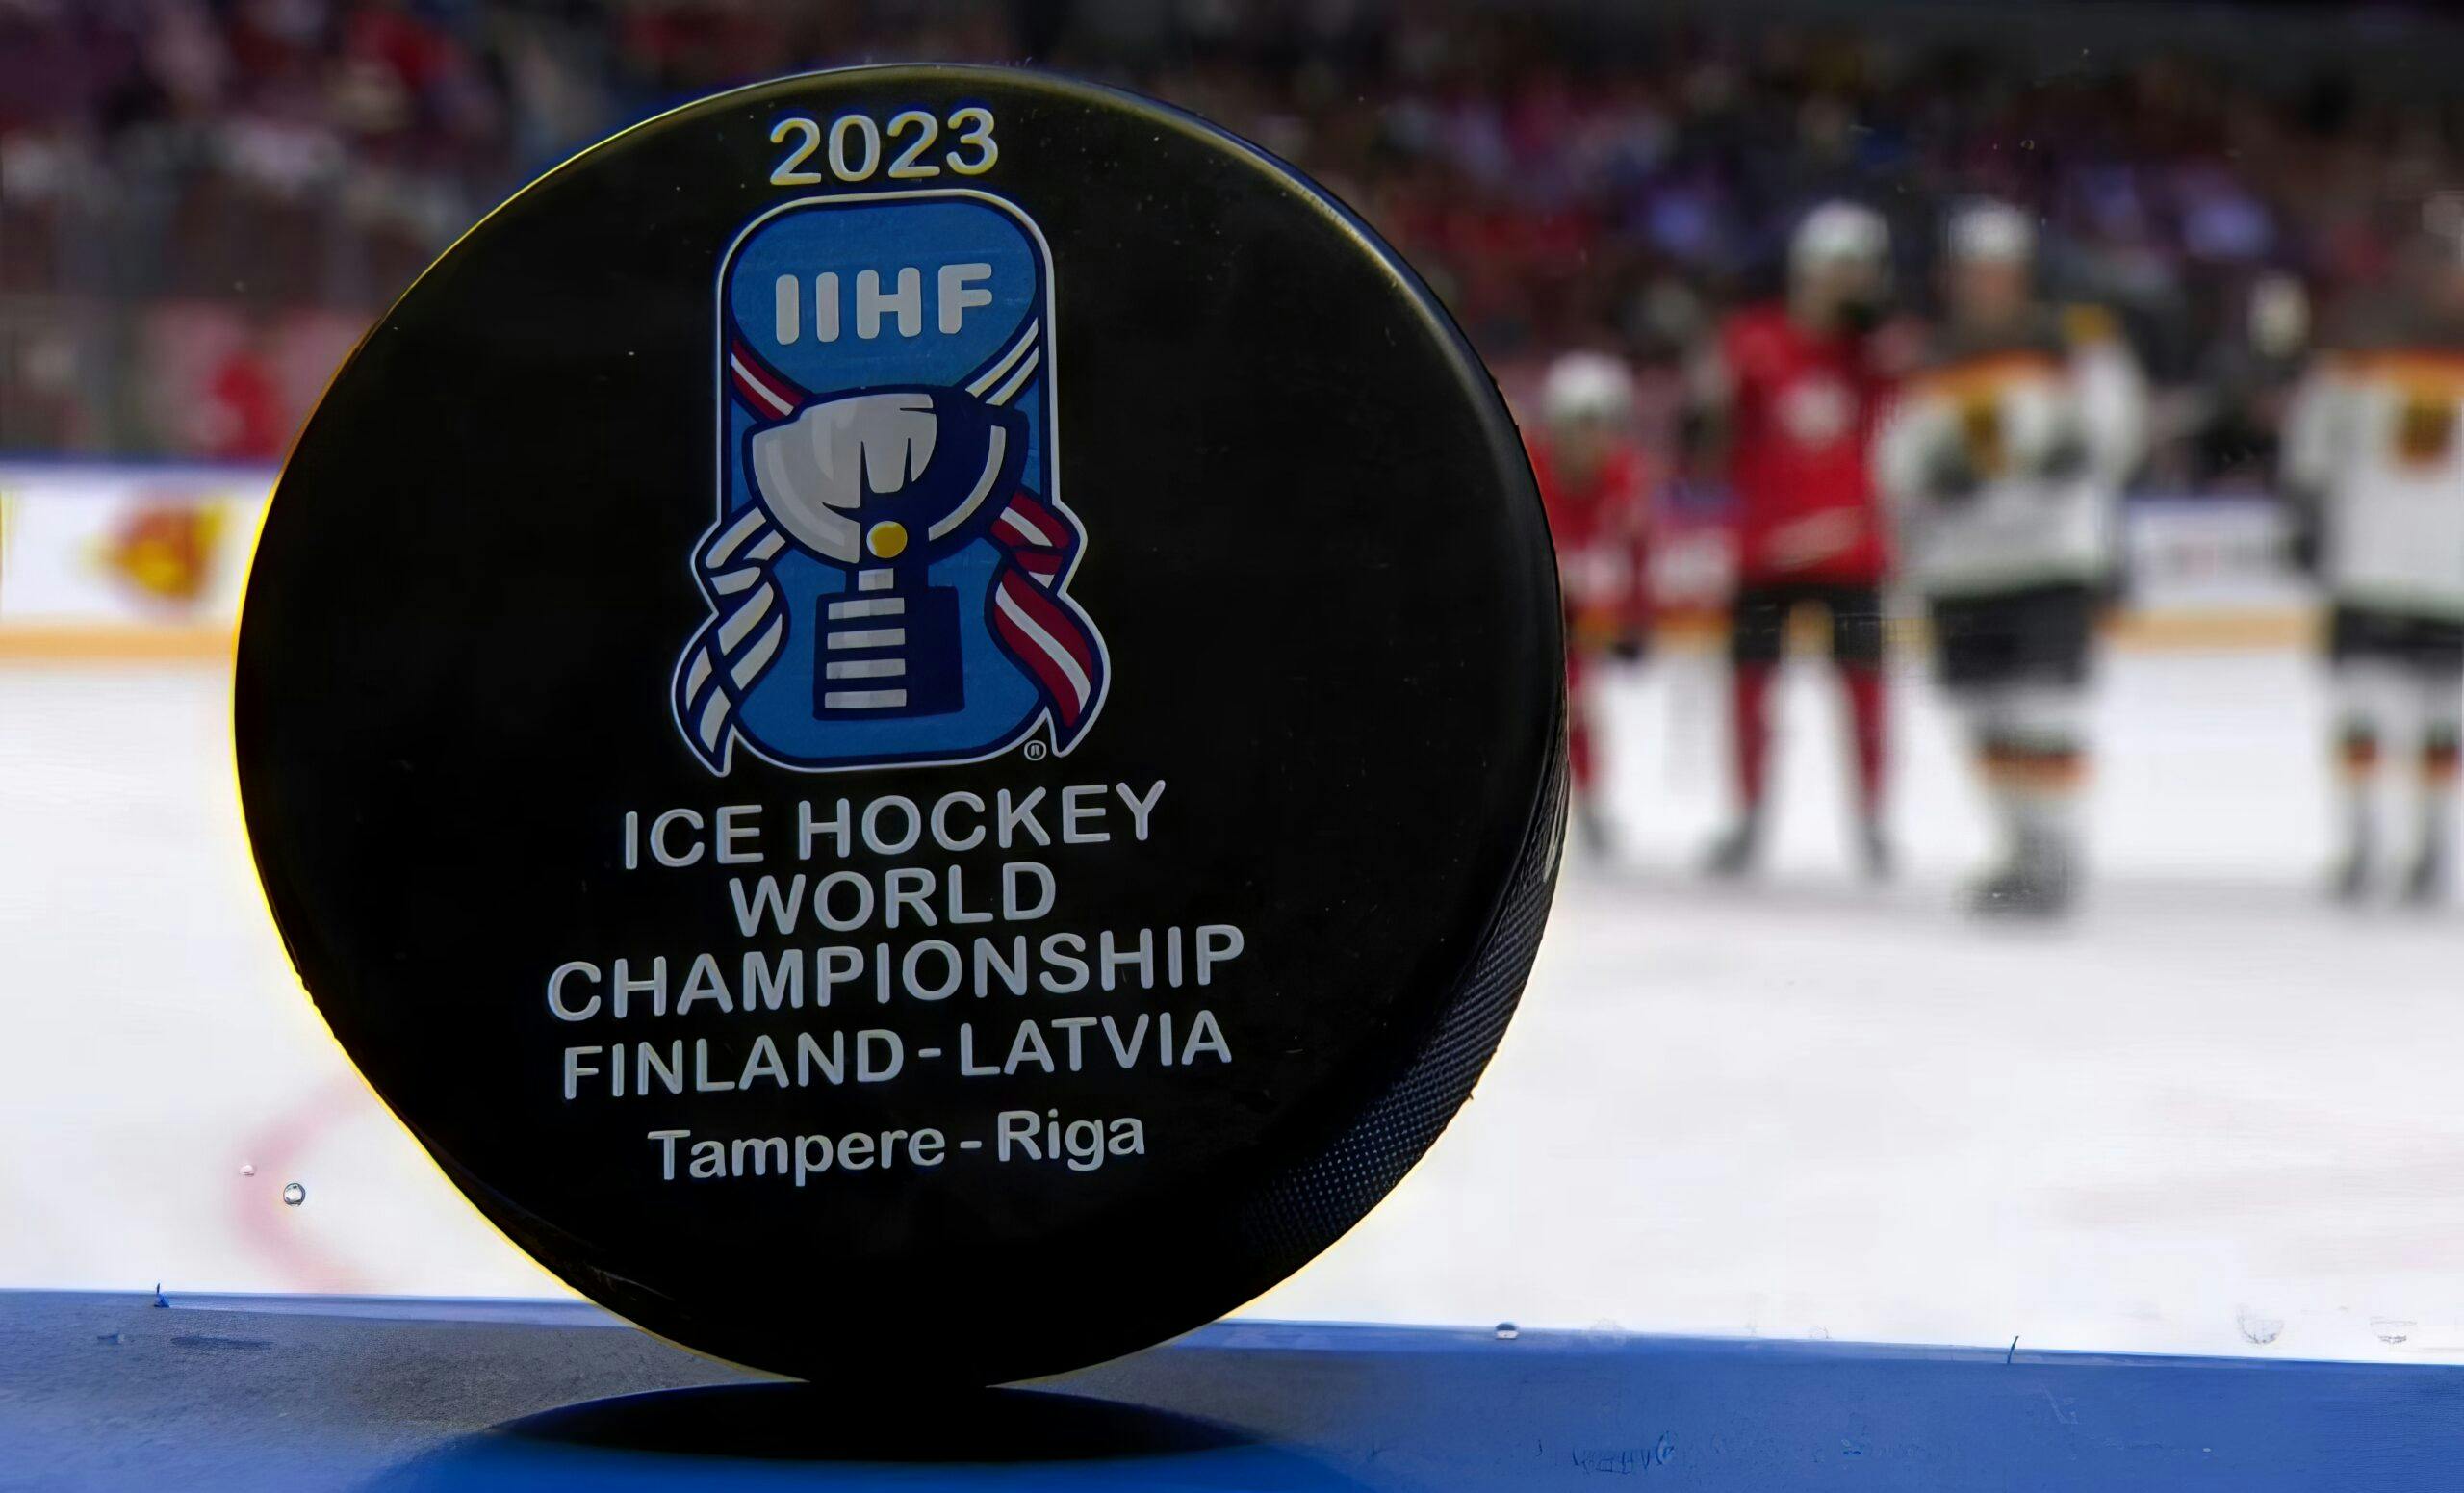 Canada, Germany to play for gold at 2023 men’s World Hockey